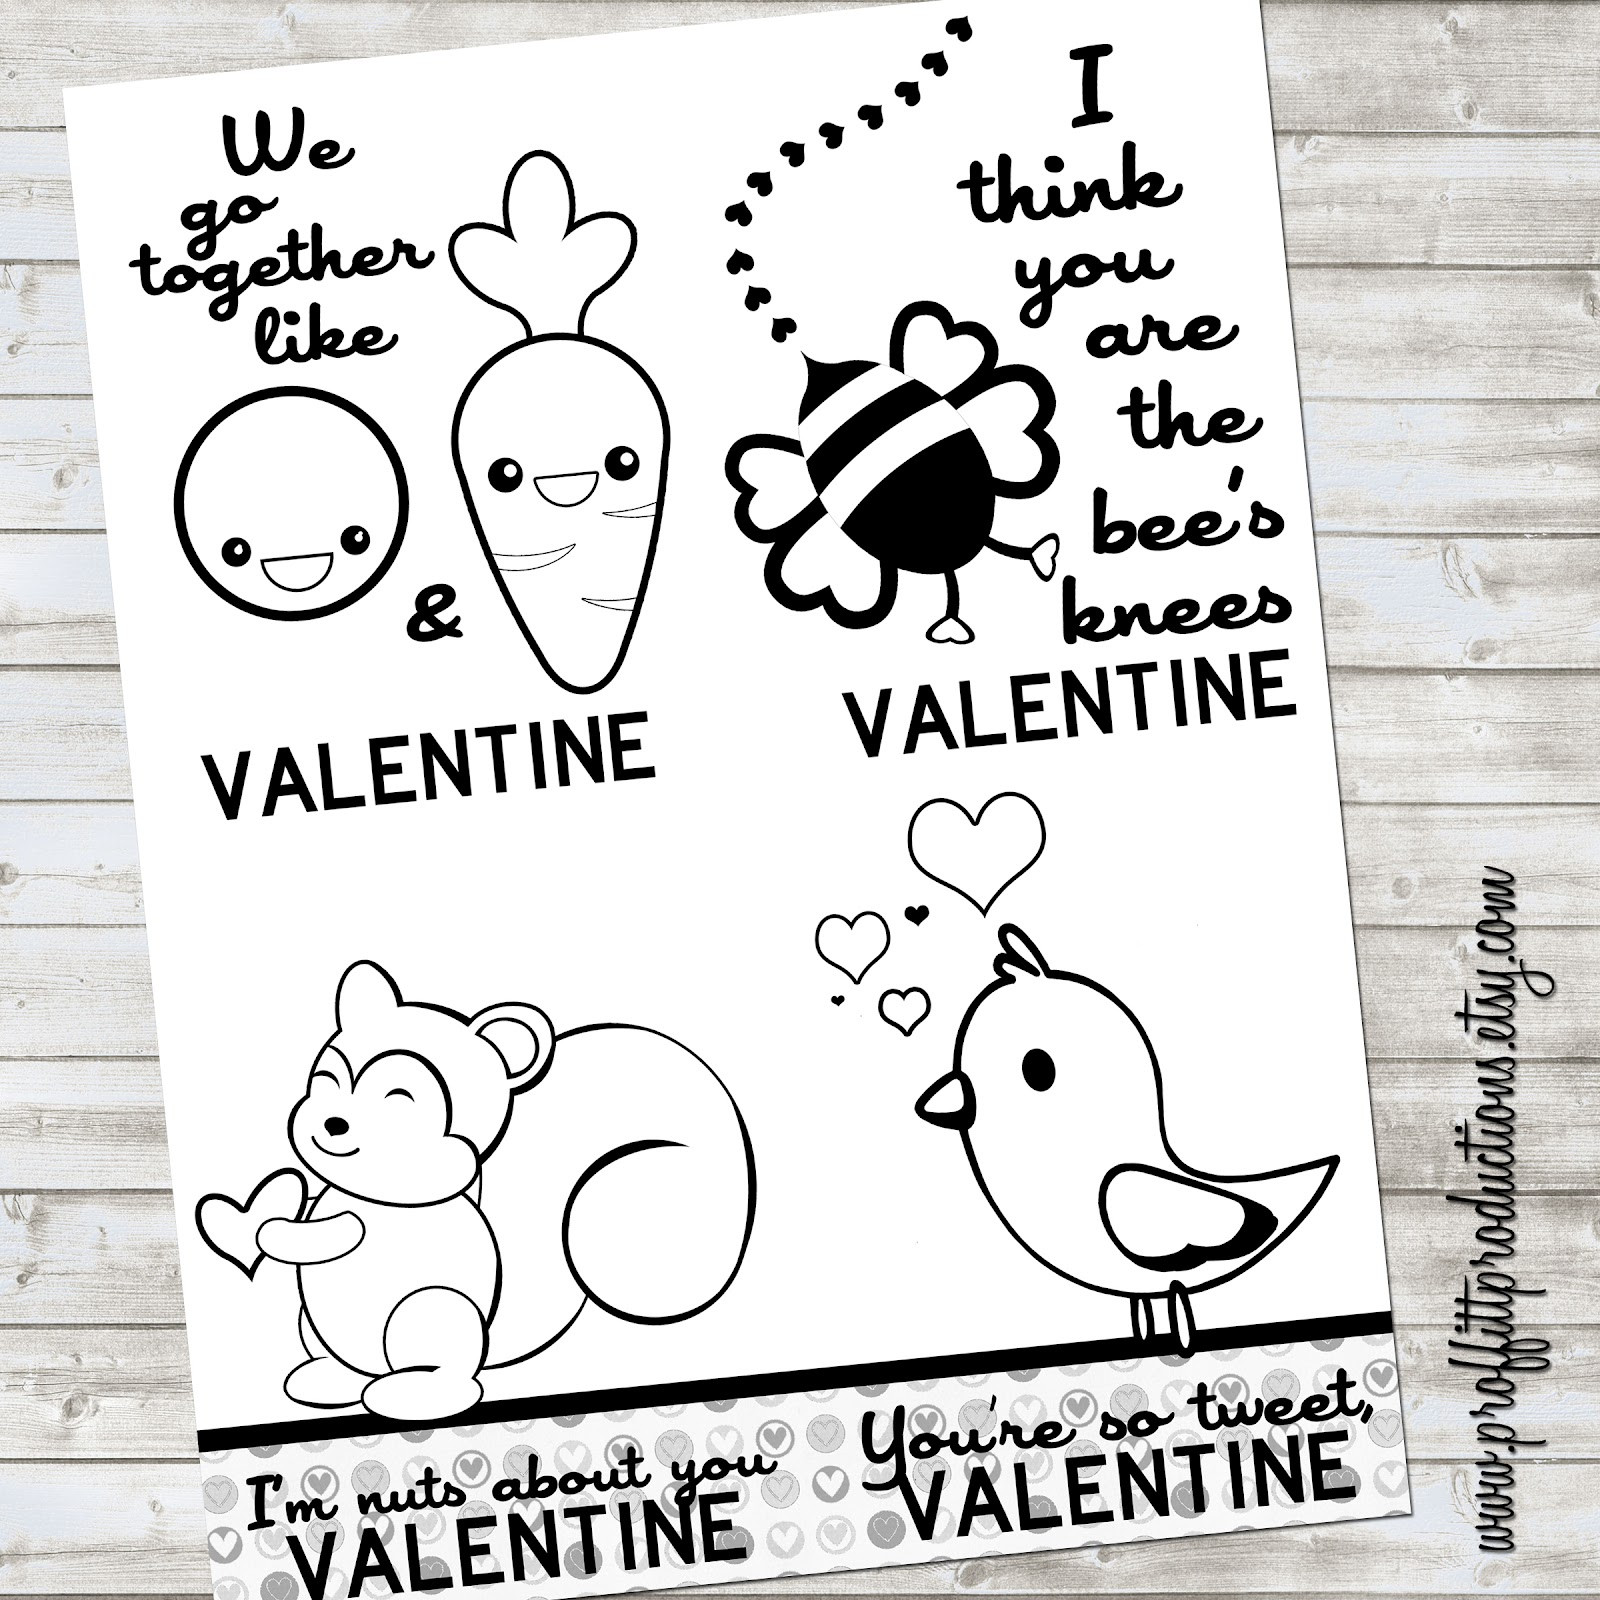 Kids Valentines Quotes
 Funny Gallery Valentines day sayings for kids